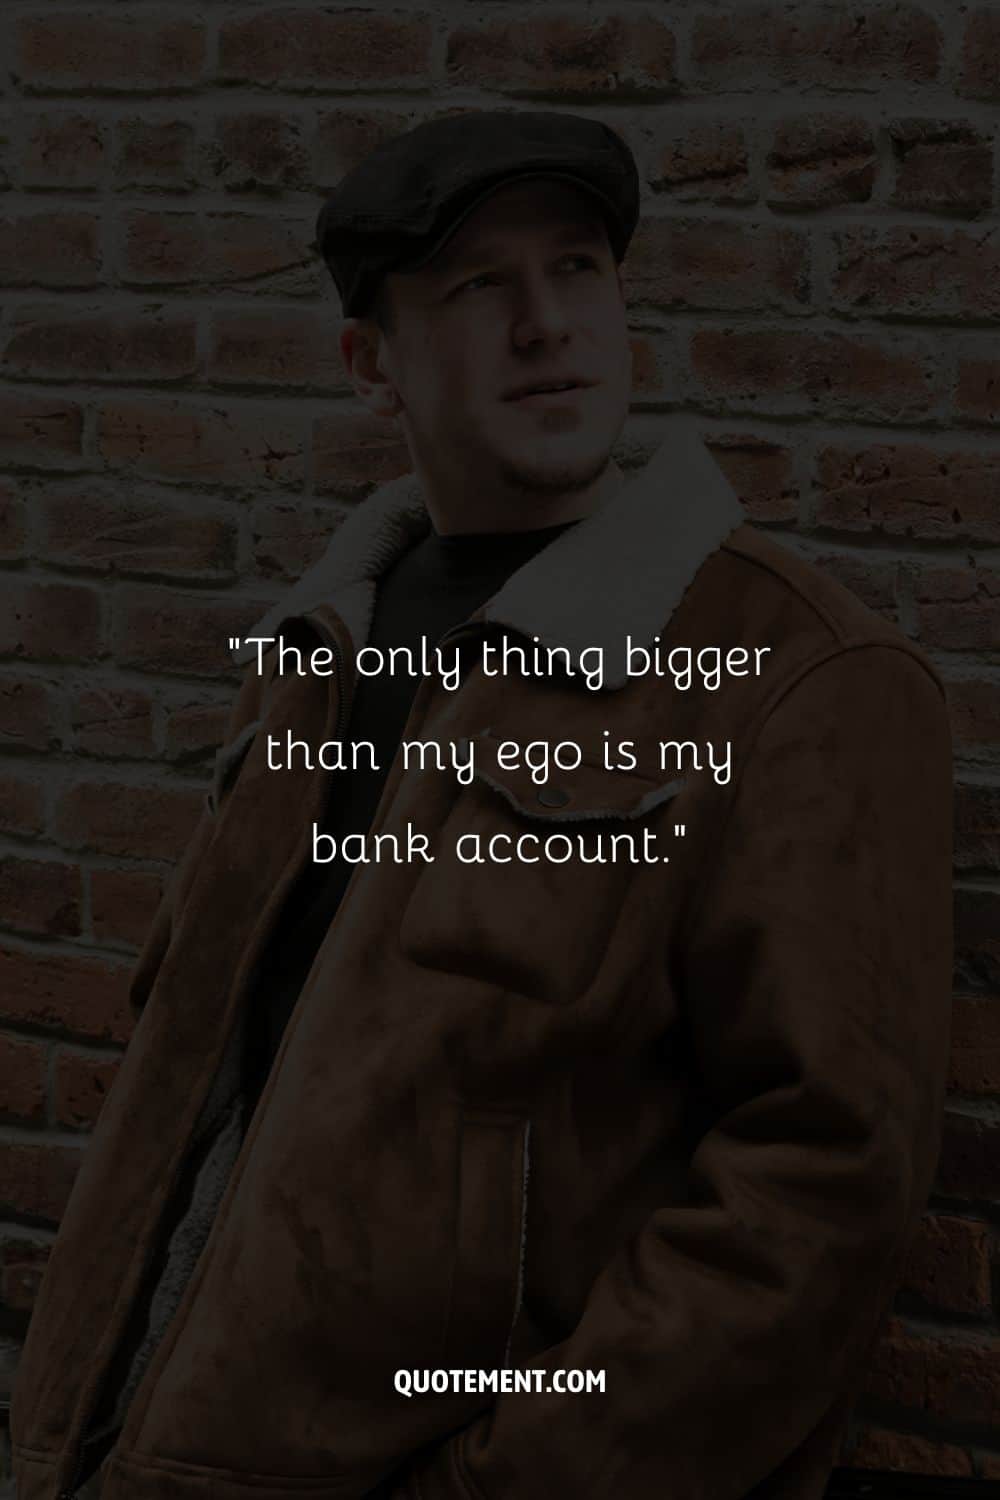 “The only thing bigger than my ego is my bank account.”